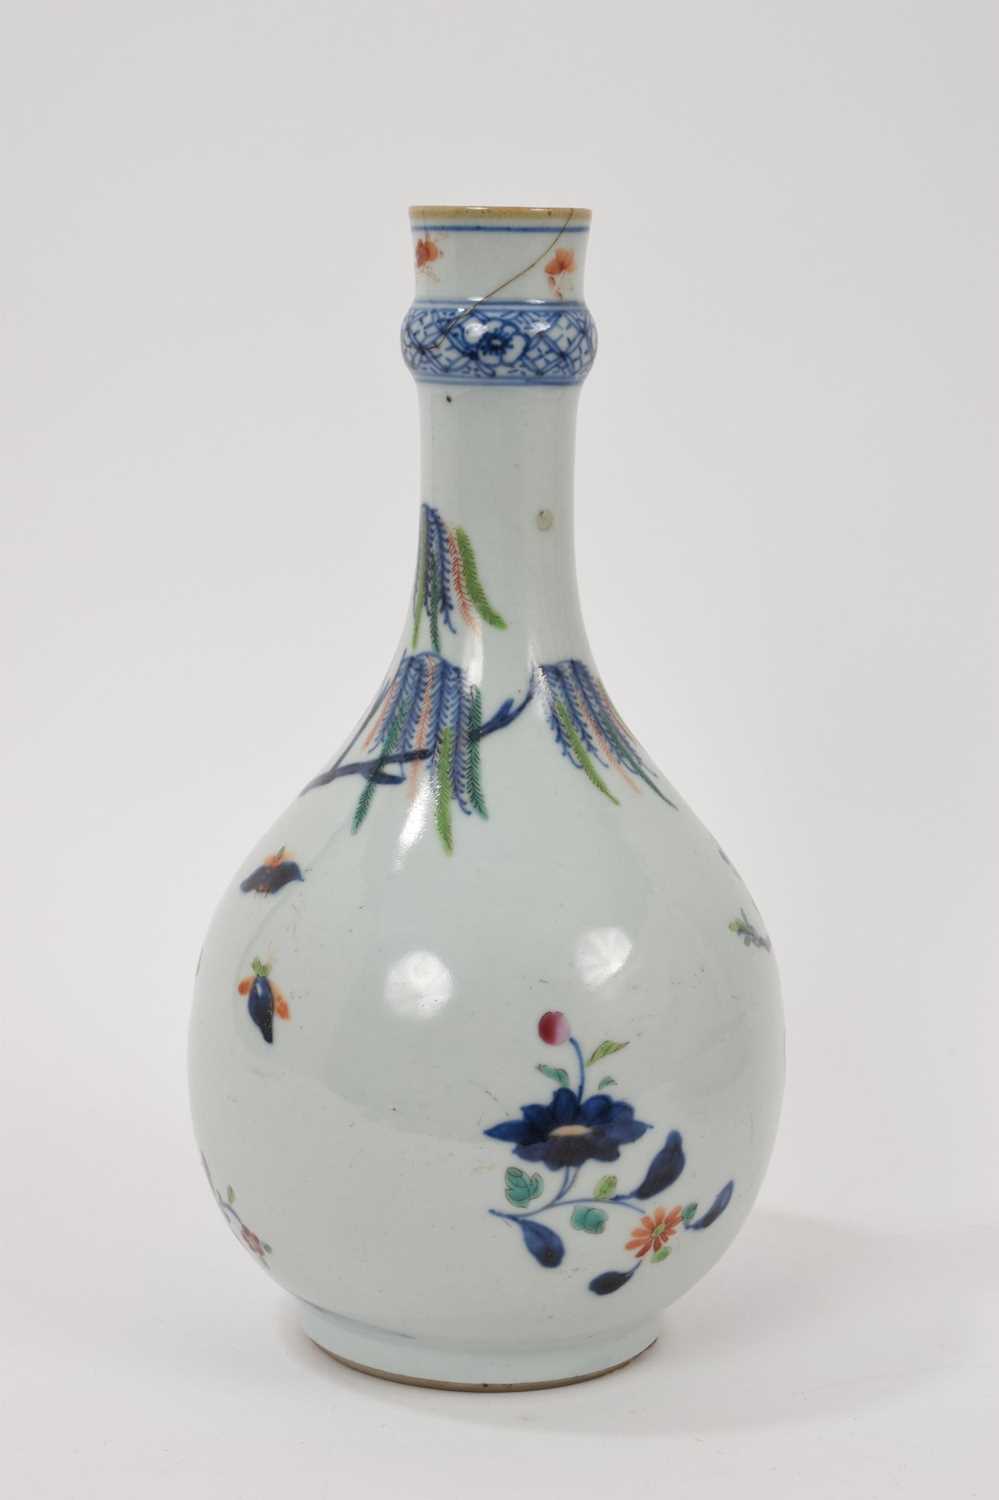 18th century Chinese porcelain guglet - Image 2 of 4